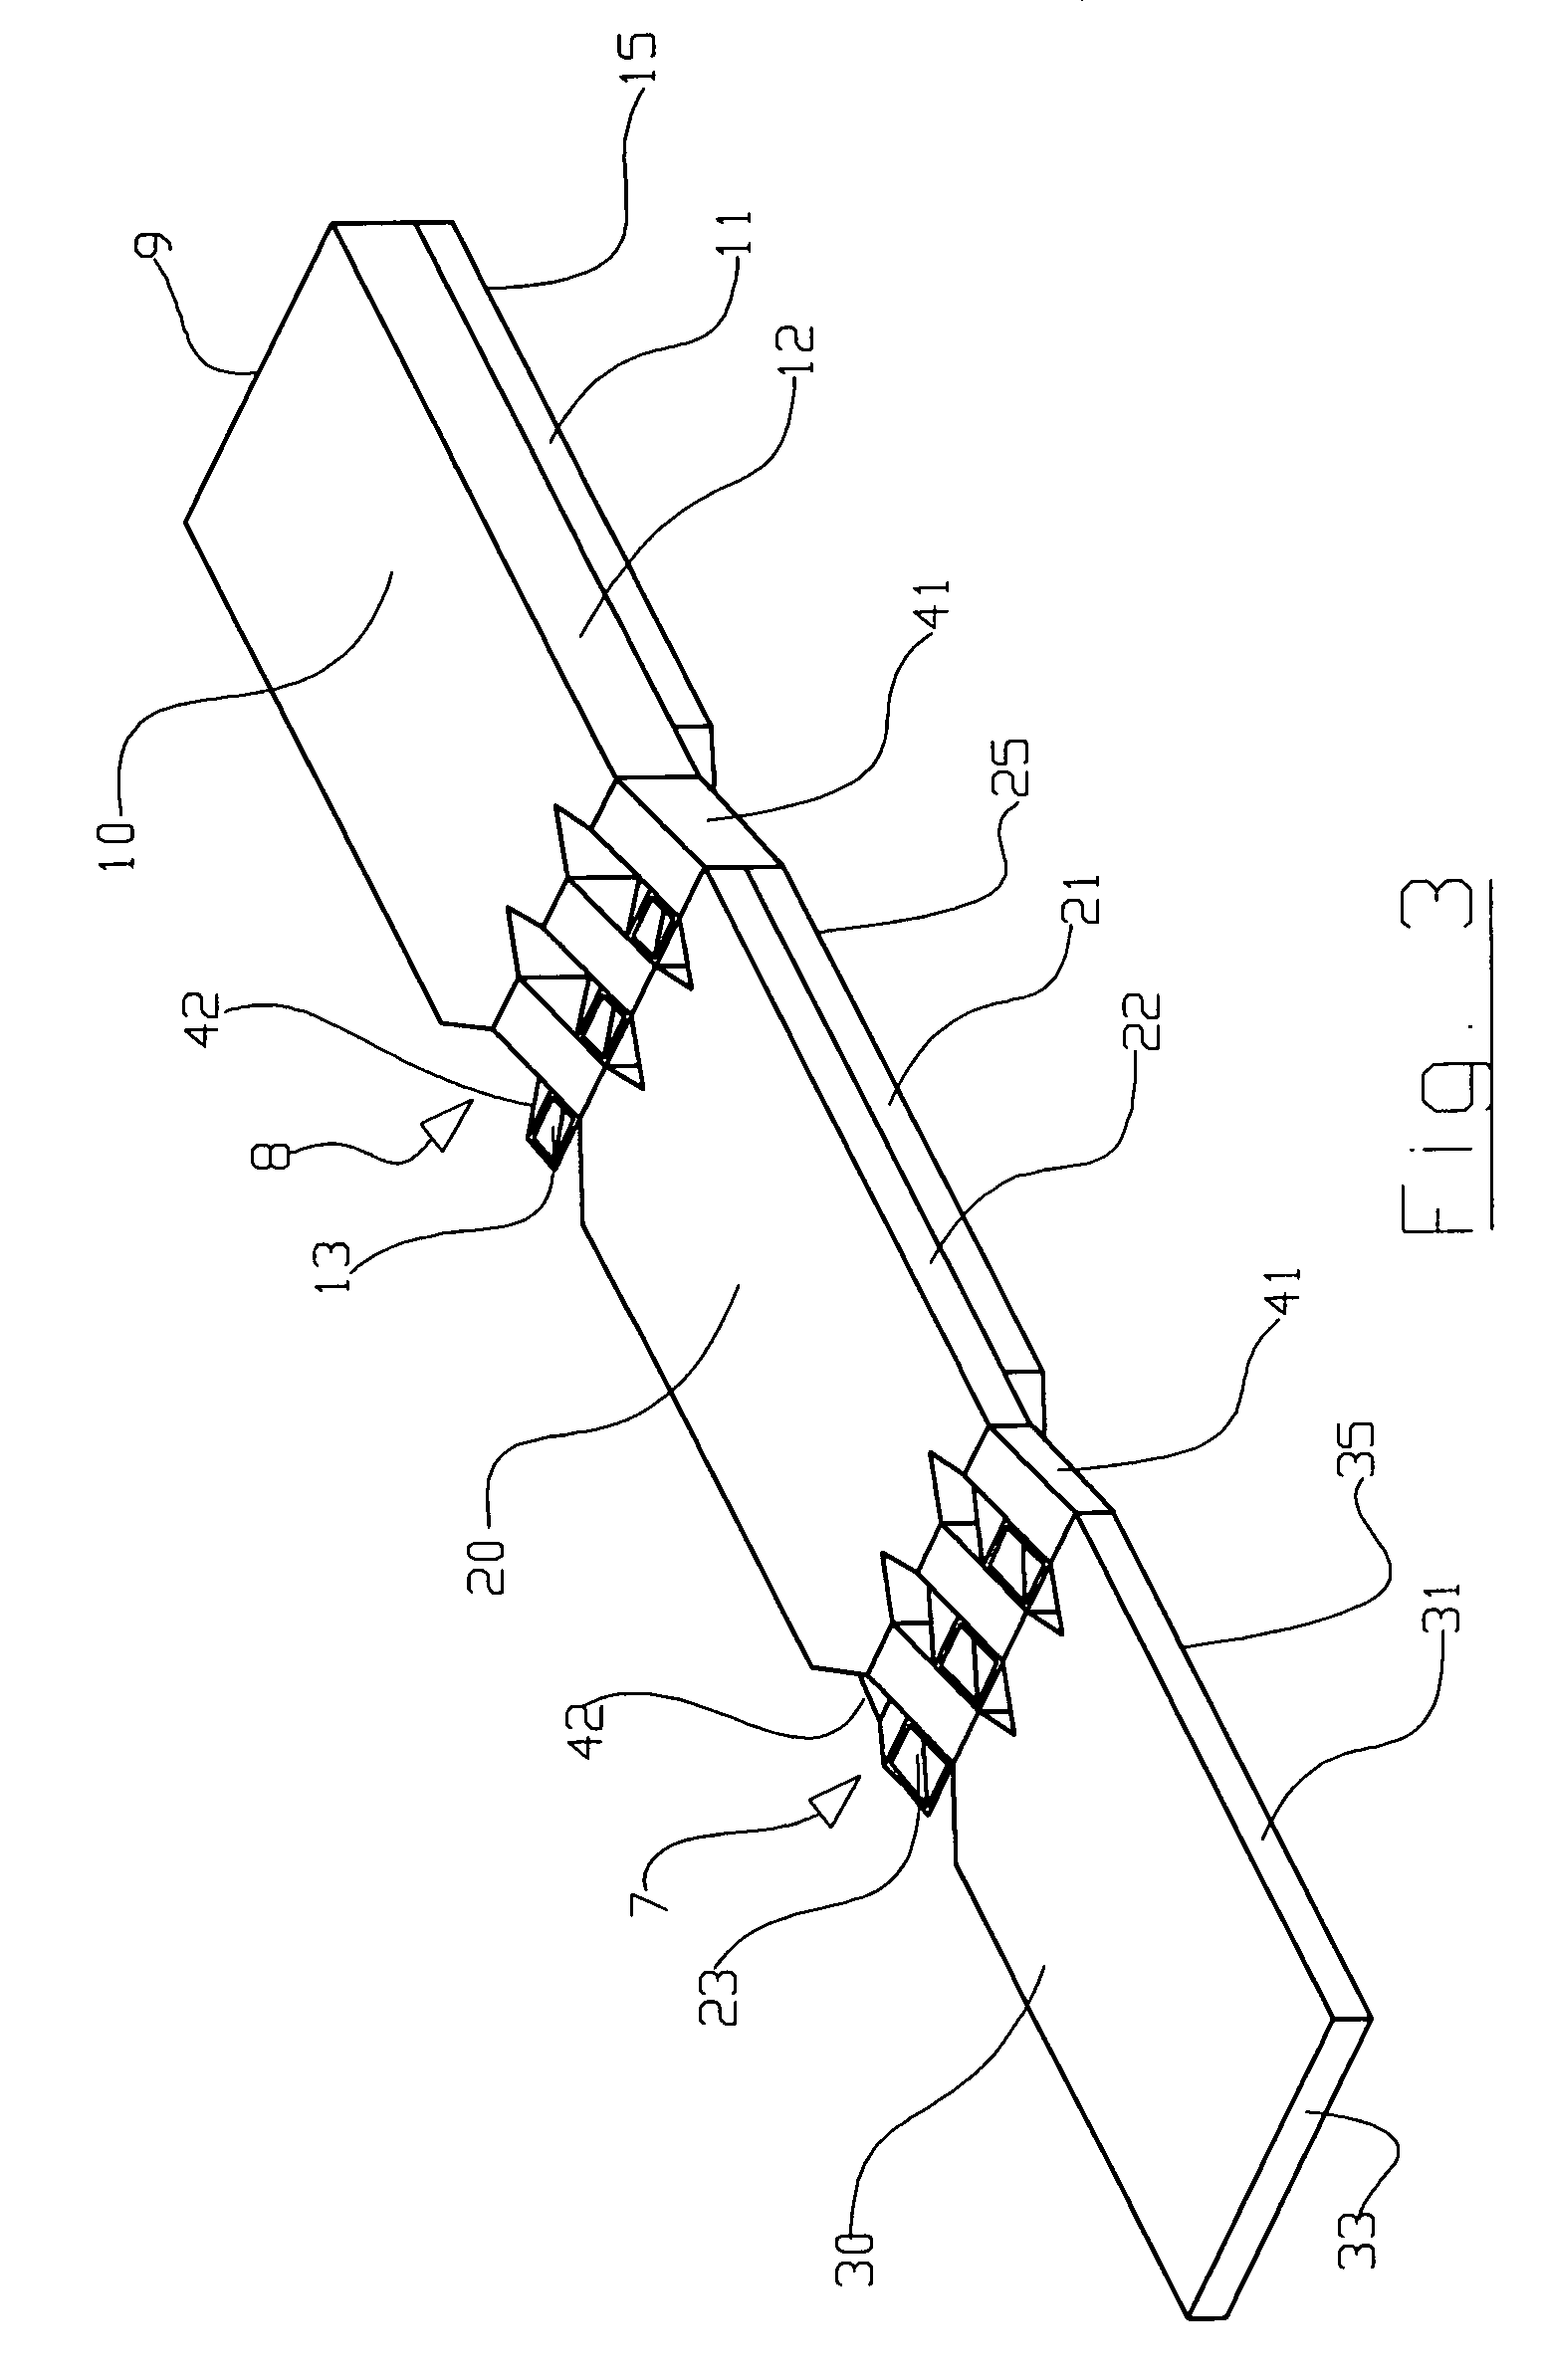 Multistage heat exchanging duct comprising a parallel conduit